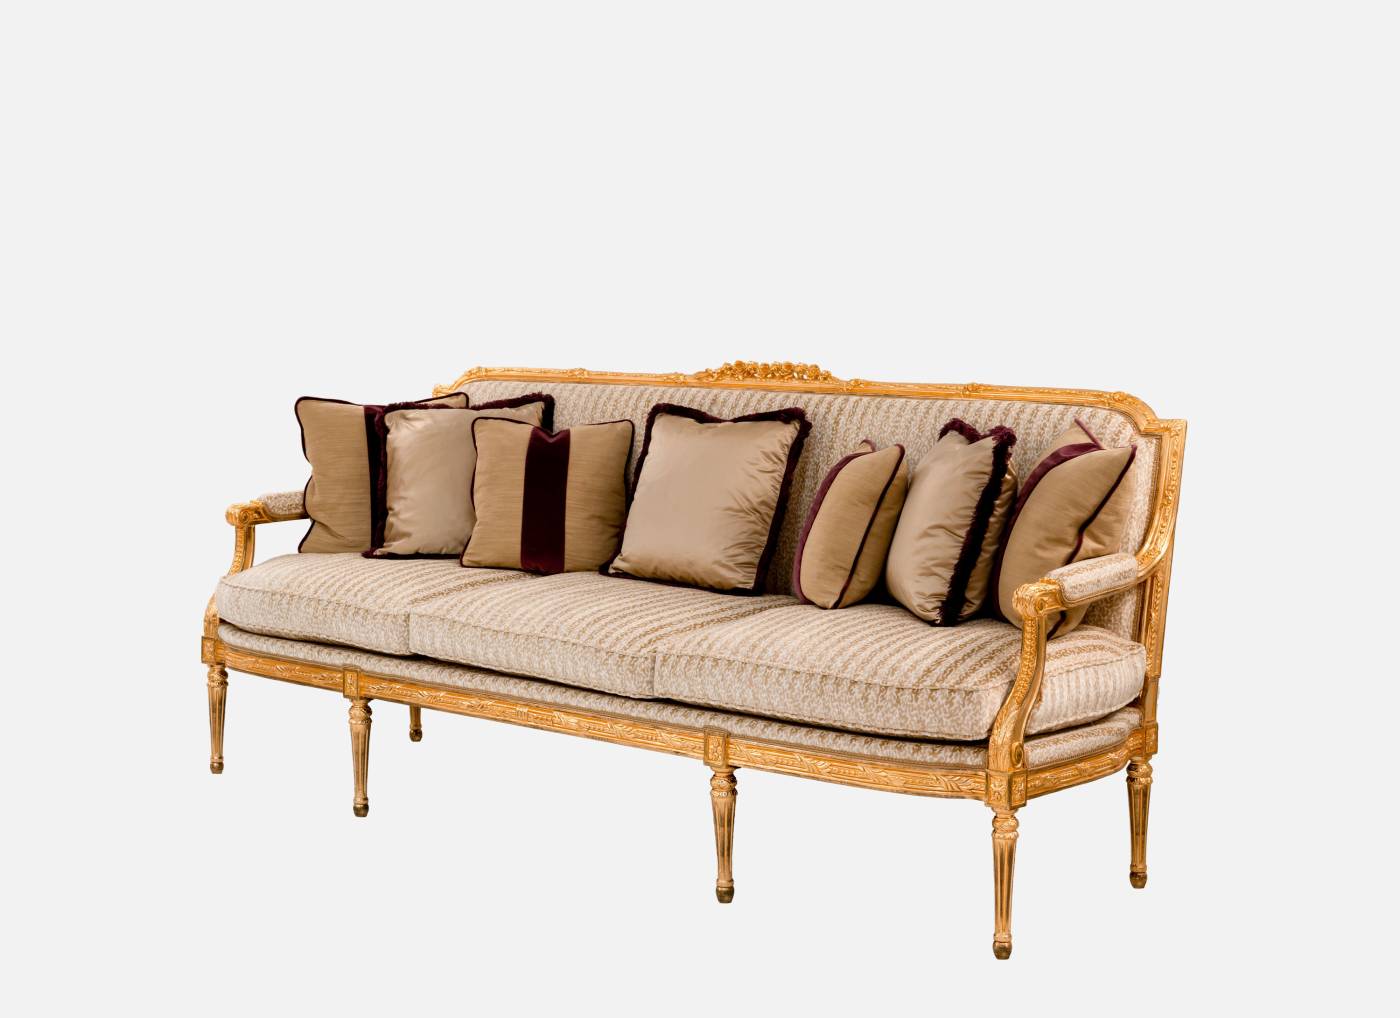 ART. 1049-3 – The elegance of luxury classic Sofas made in Italy by C.G. Capelletti.